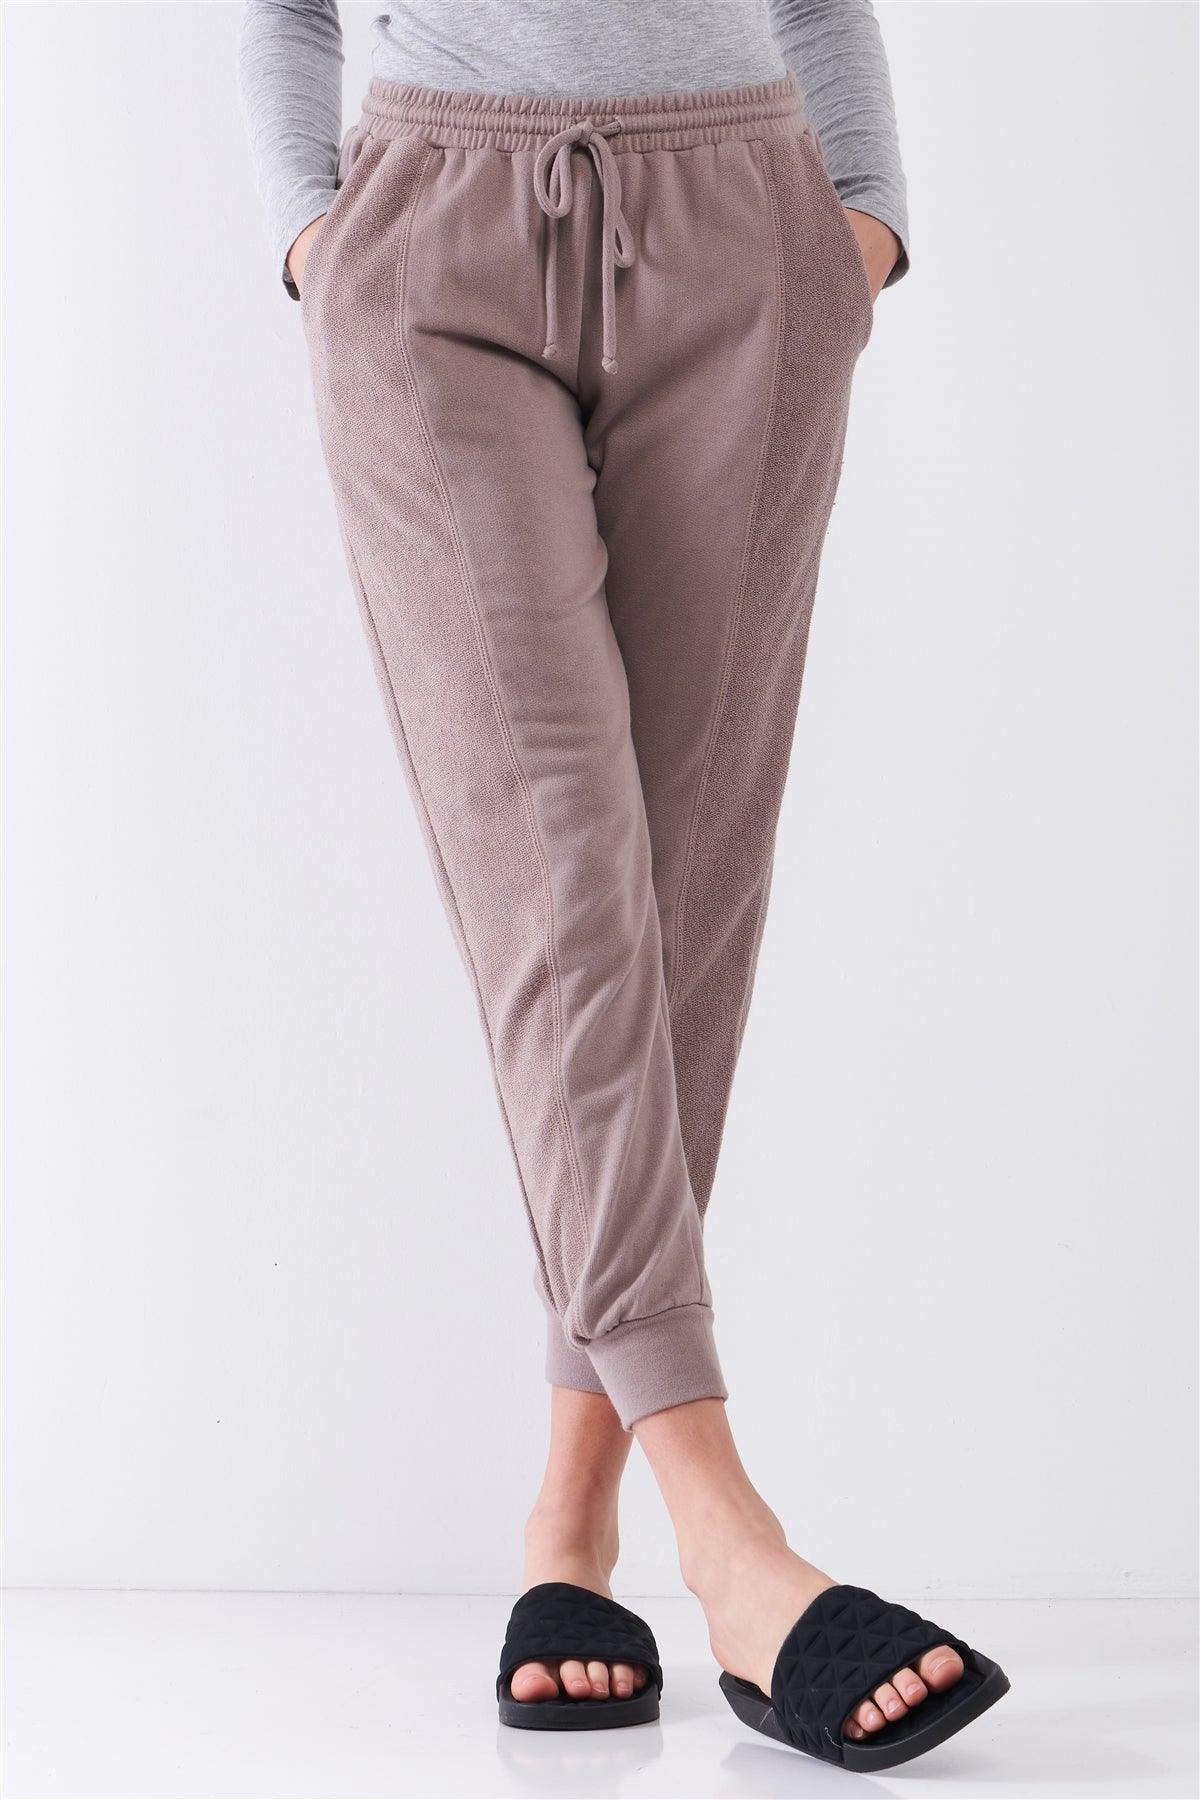 Mocha Brown Brushed Inside-Out Sides Trim Mid-Rise Relaxed Jogger Sweatpants /3-2-1